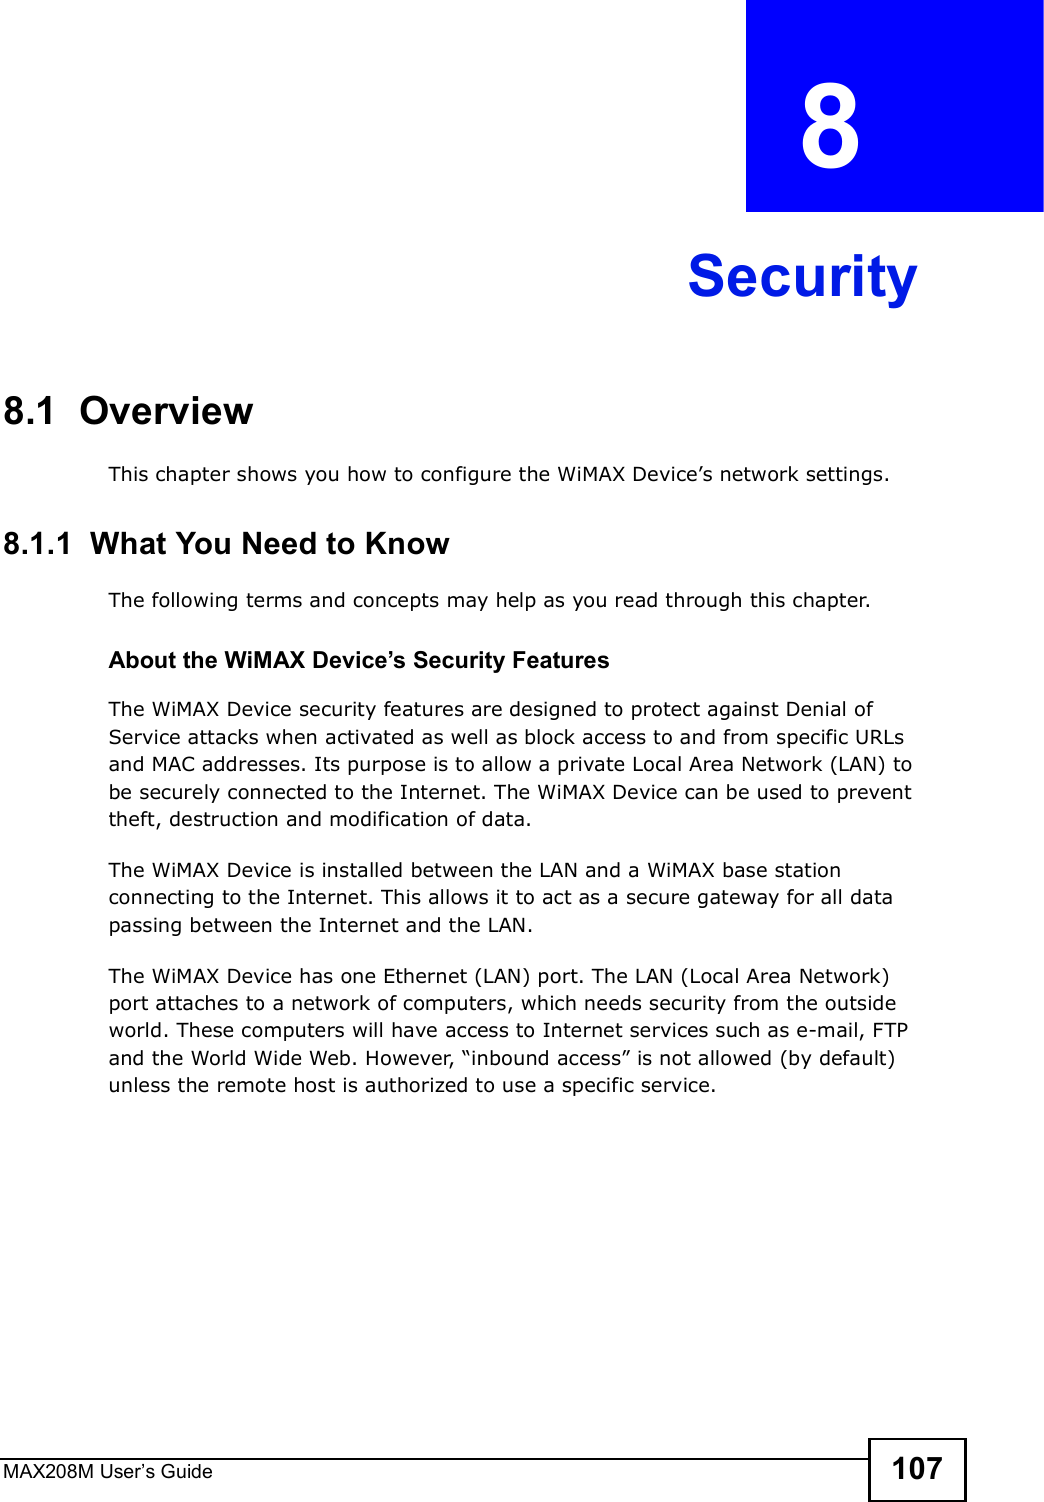 MAX208M User s Guide 107CHAPTER  8 Security8.1  OverviewThis chapter shows you how to configure the WiMAX Device s network settings.8.1.1  What You Need to KnowThe following terms and concepts may help as you read through this chapter.About the WiMAX Device!s Security FeaturesThe WiMAX Device security features are designed to protect against Denial of Service attacks when activated as well as block access to and from specific URLs and MAC addresses. Its purpose is to allow a private Local Area Network (LAN) to be securely connected to the Internet. The WiMAX Device can be used to prevent theft, destruction and modification of data. The WiMAX Device is installed between the LAN and a WiMAX base station connecting to the Internet. This allows it to act as a secure gateway for all data passing between the Internet and the LAN.The WiMAX Device has one Ethernet (LAN) port. The LAN (Local Area Network) port attaches to a network of computers, which needs security from the outside world. These computers will have access to Internet services such as e-mail, FTP and the World Wide Web. However, &quot;inbound access# is not allowed (by default) unless the remote host is authorized to use a specific service.